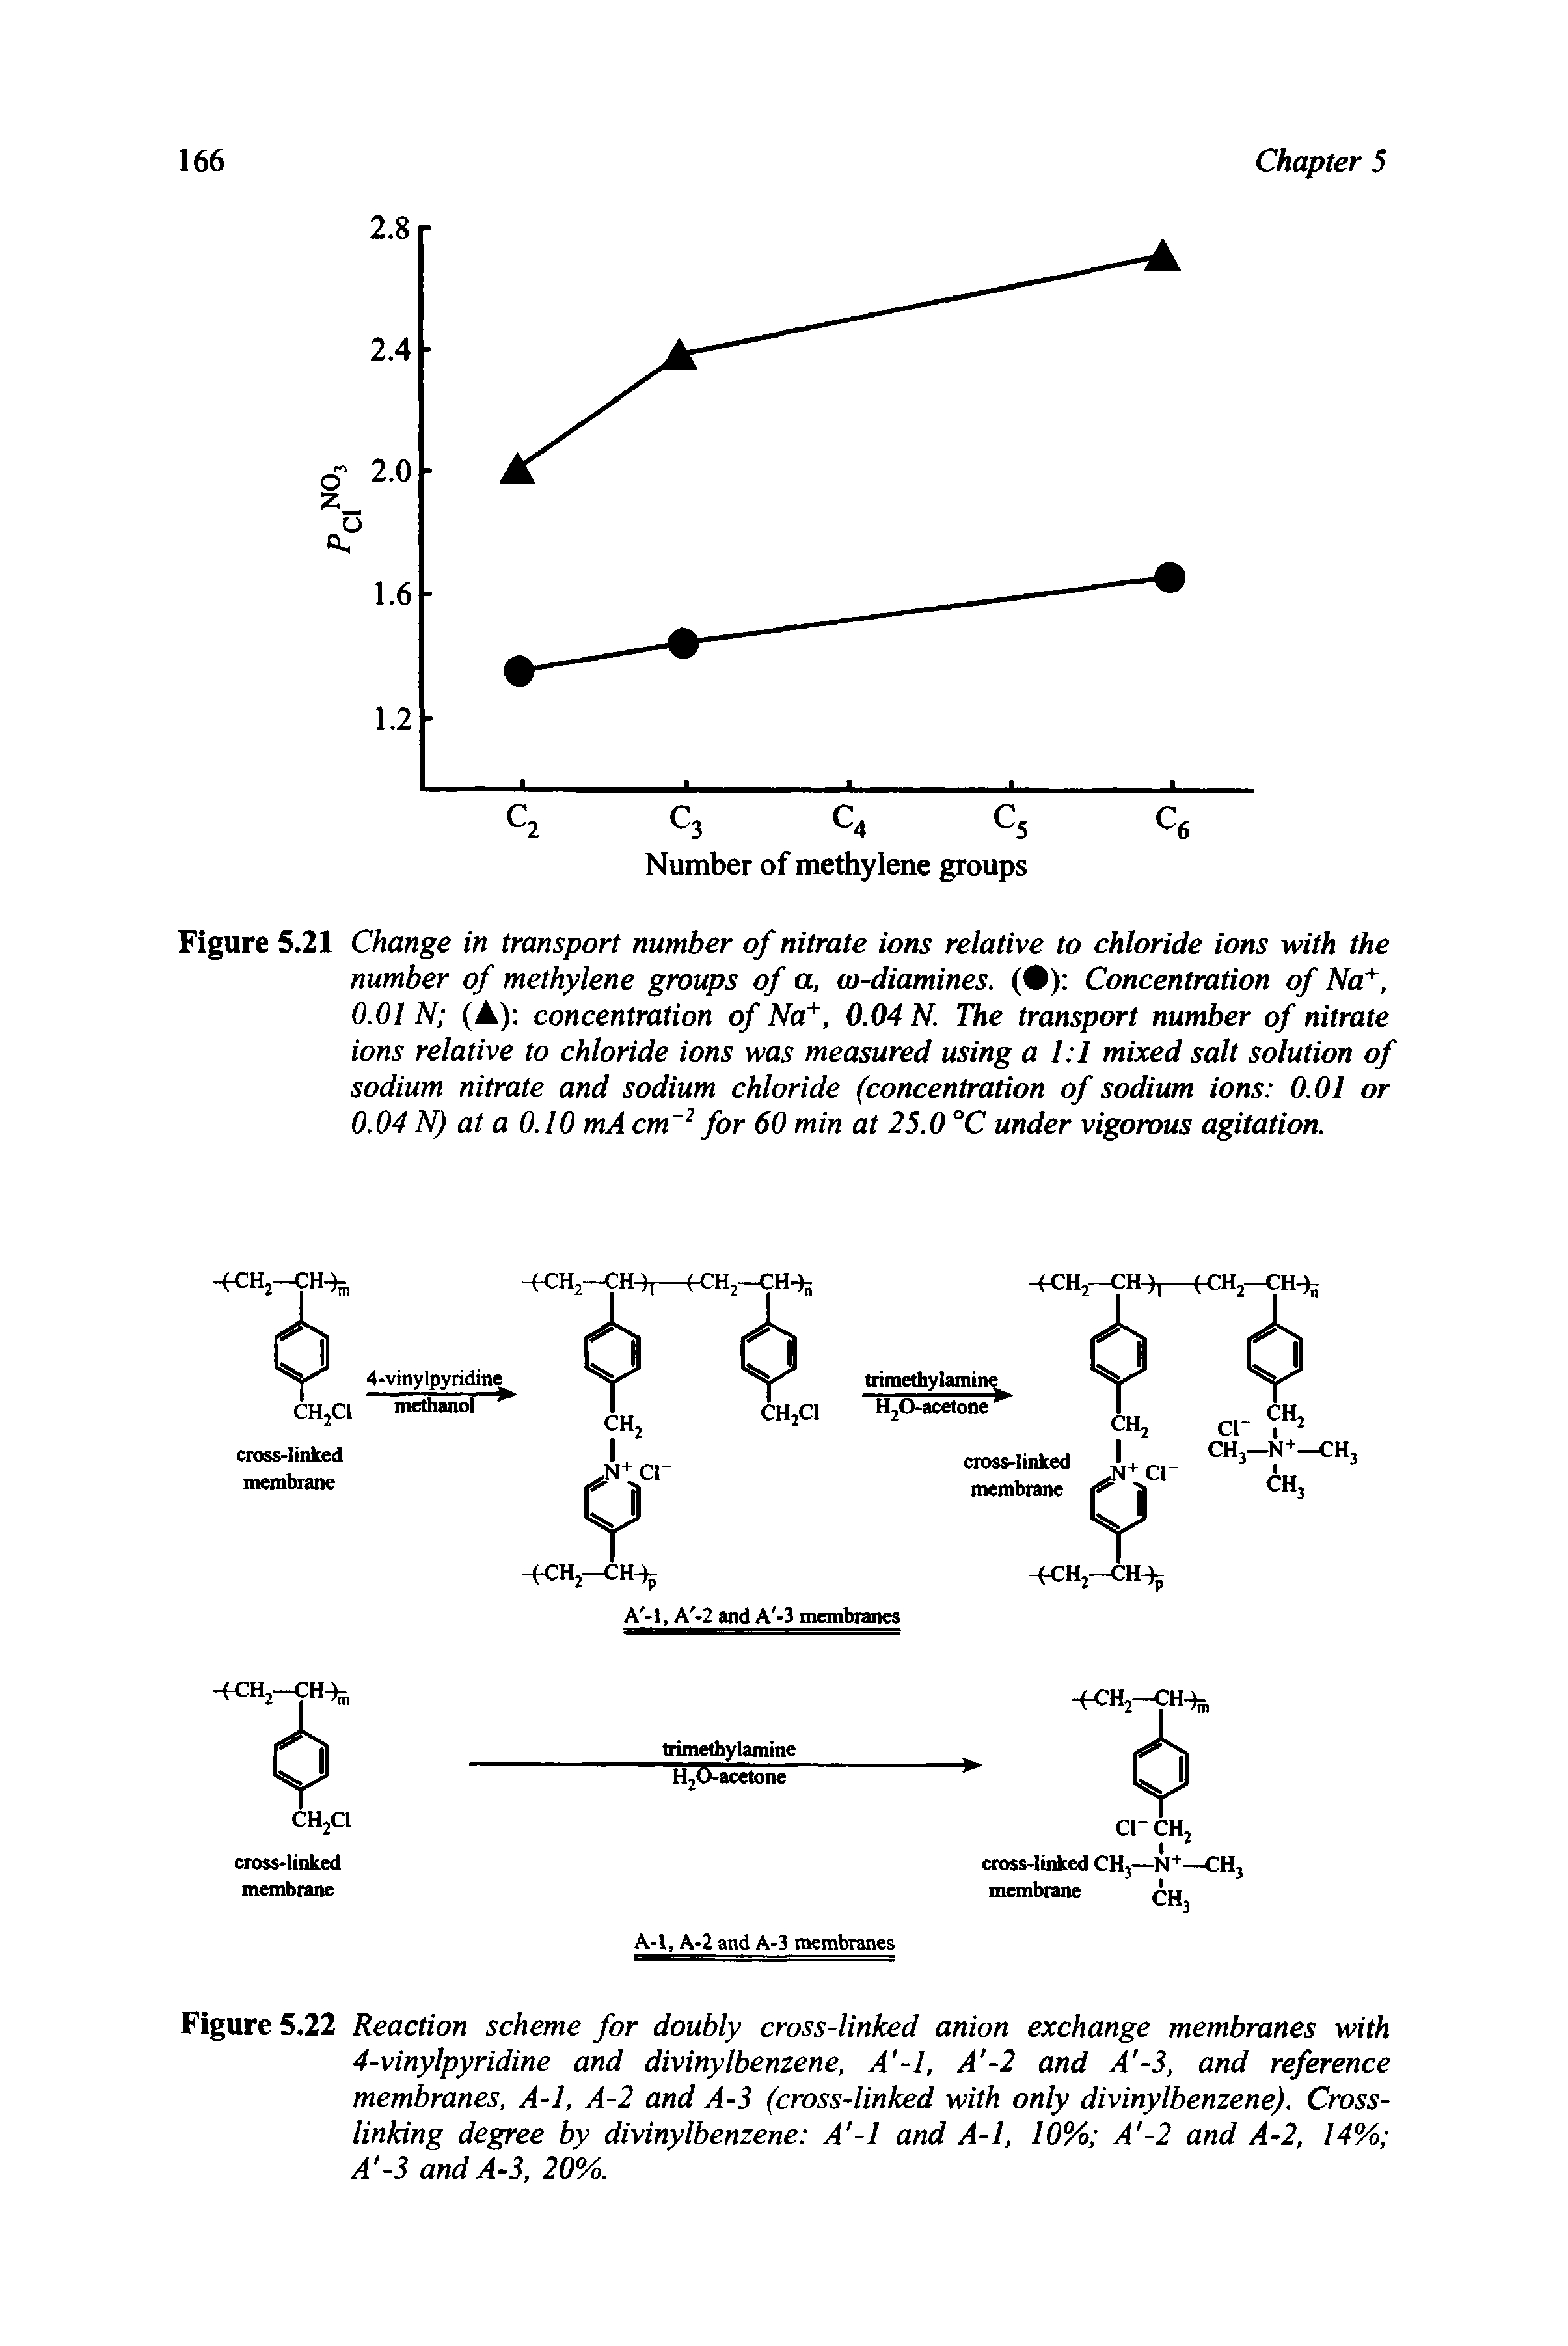 Figure 5.21 Change in transport number of nitrate ions relative to chloride ions with the number of methylene groups of a, co-diamines. ( ) Concentration of Na+, 0.01 N (A) concentration of Na+, 0.04 N. The transport number of nitrate ions relative to chloride ions was measured using a 1 1 mixed salt solution of sodium nitrate and sodium chloride (concentration of sodium ions 0.01 or 0.04 N) at a 0.10 mA cm 2 for 60 min at 25.0 °C under vigorous agitation.